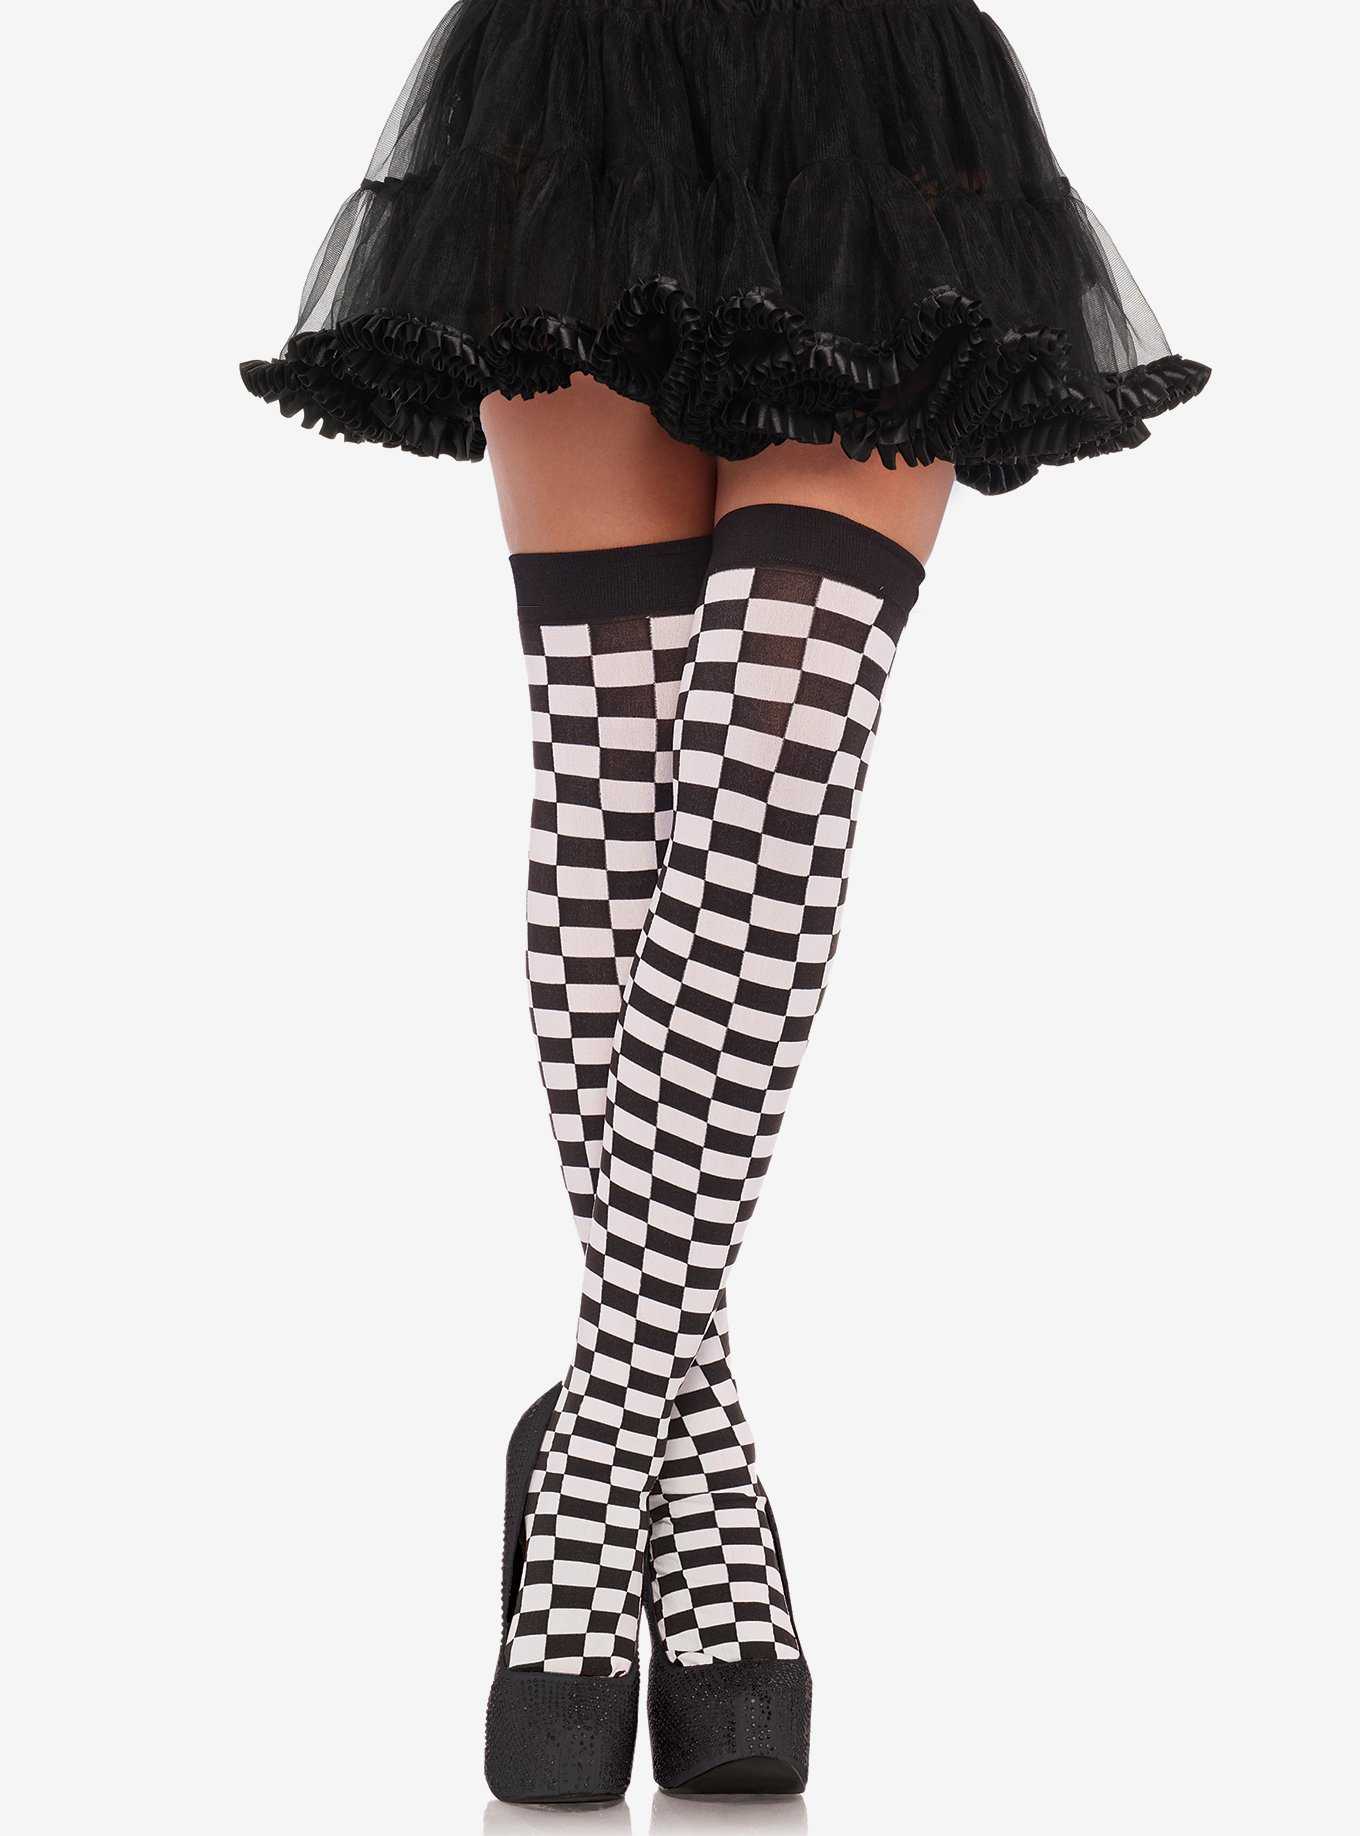  Be Wicked Women's Black and White Checkered Pantyhose,  Black/White, One Size: Clothing, Shoes & Jewelry